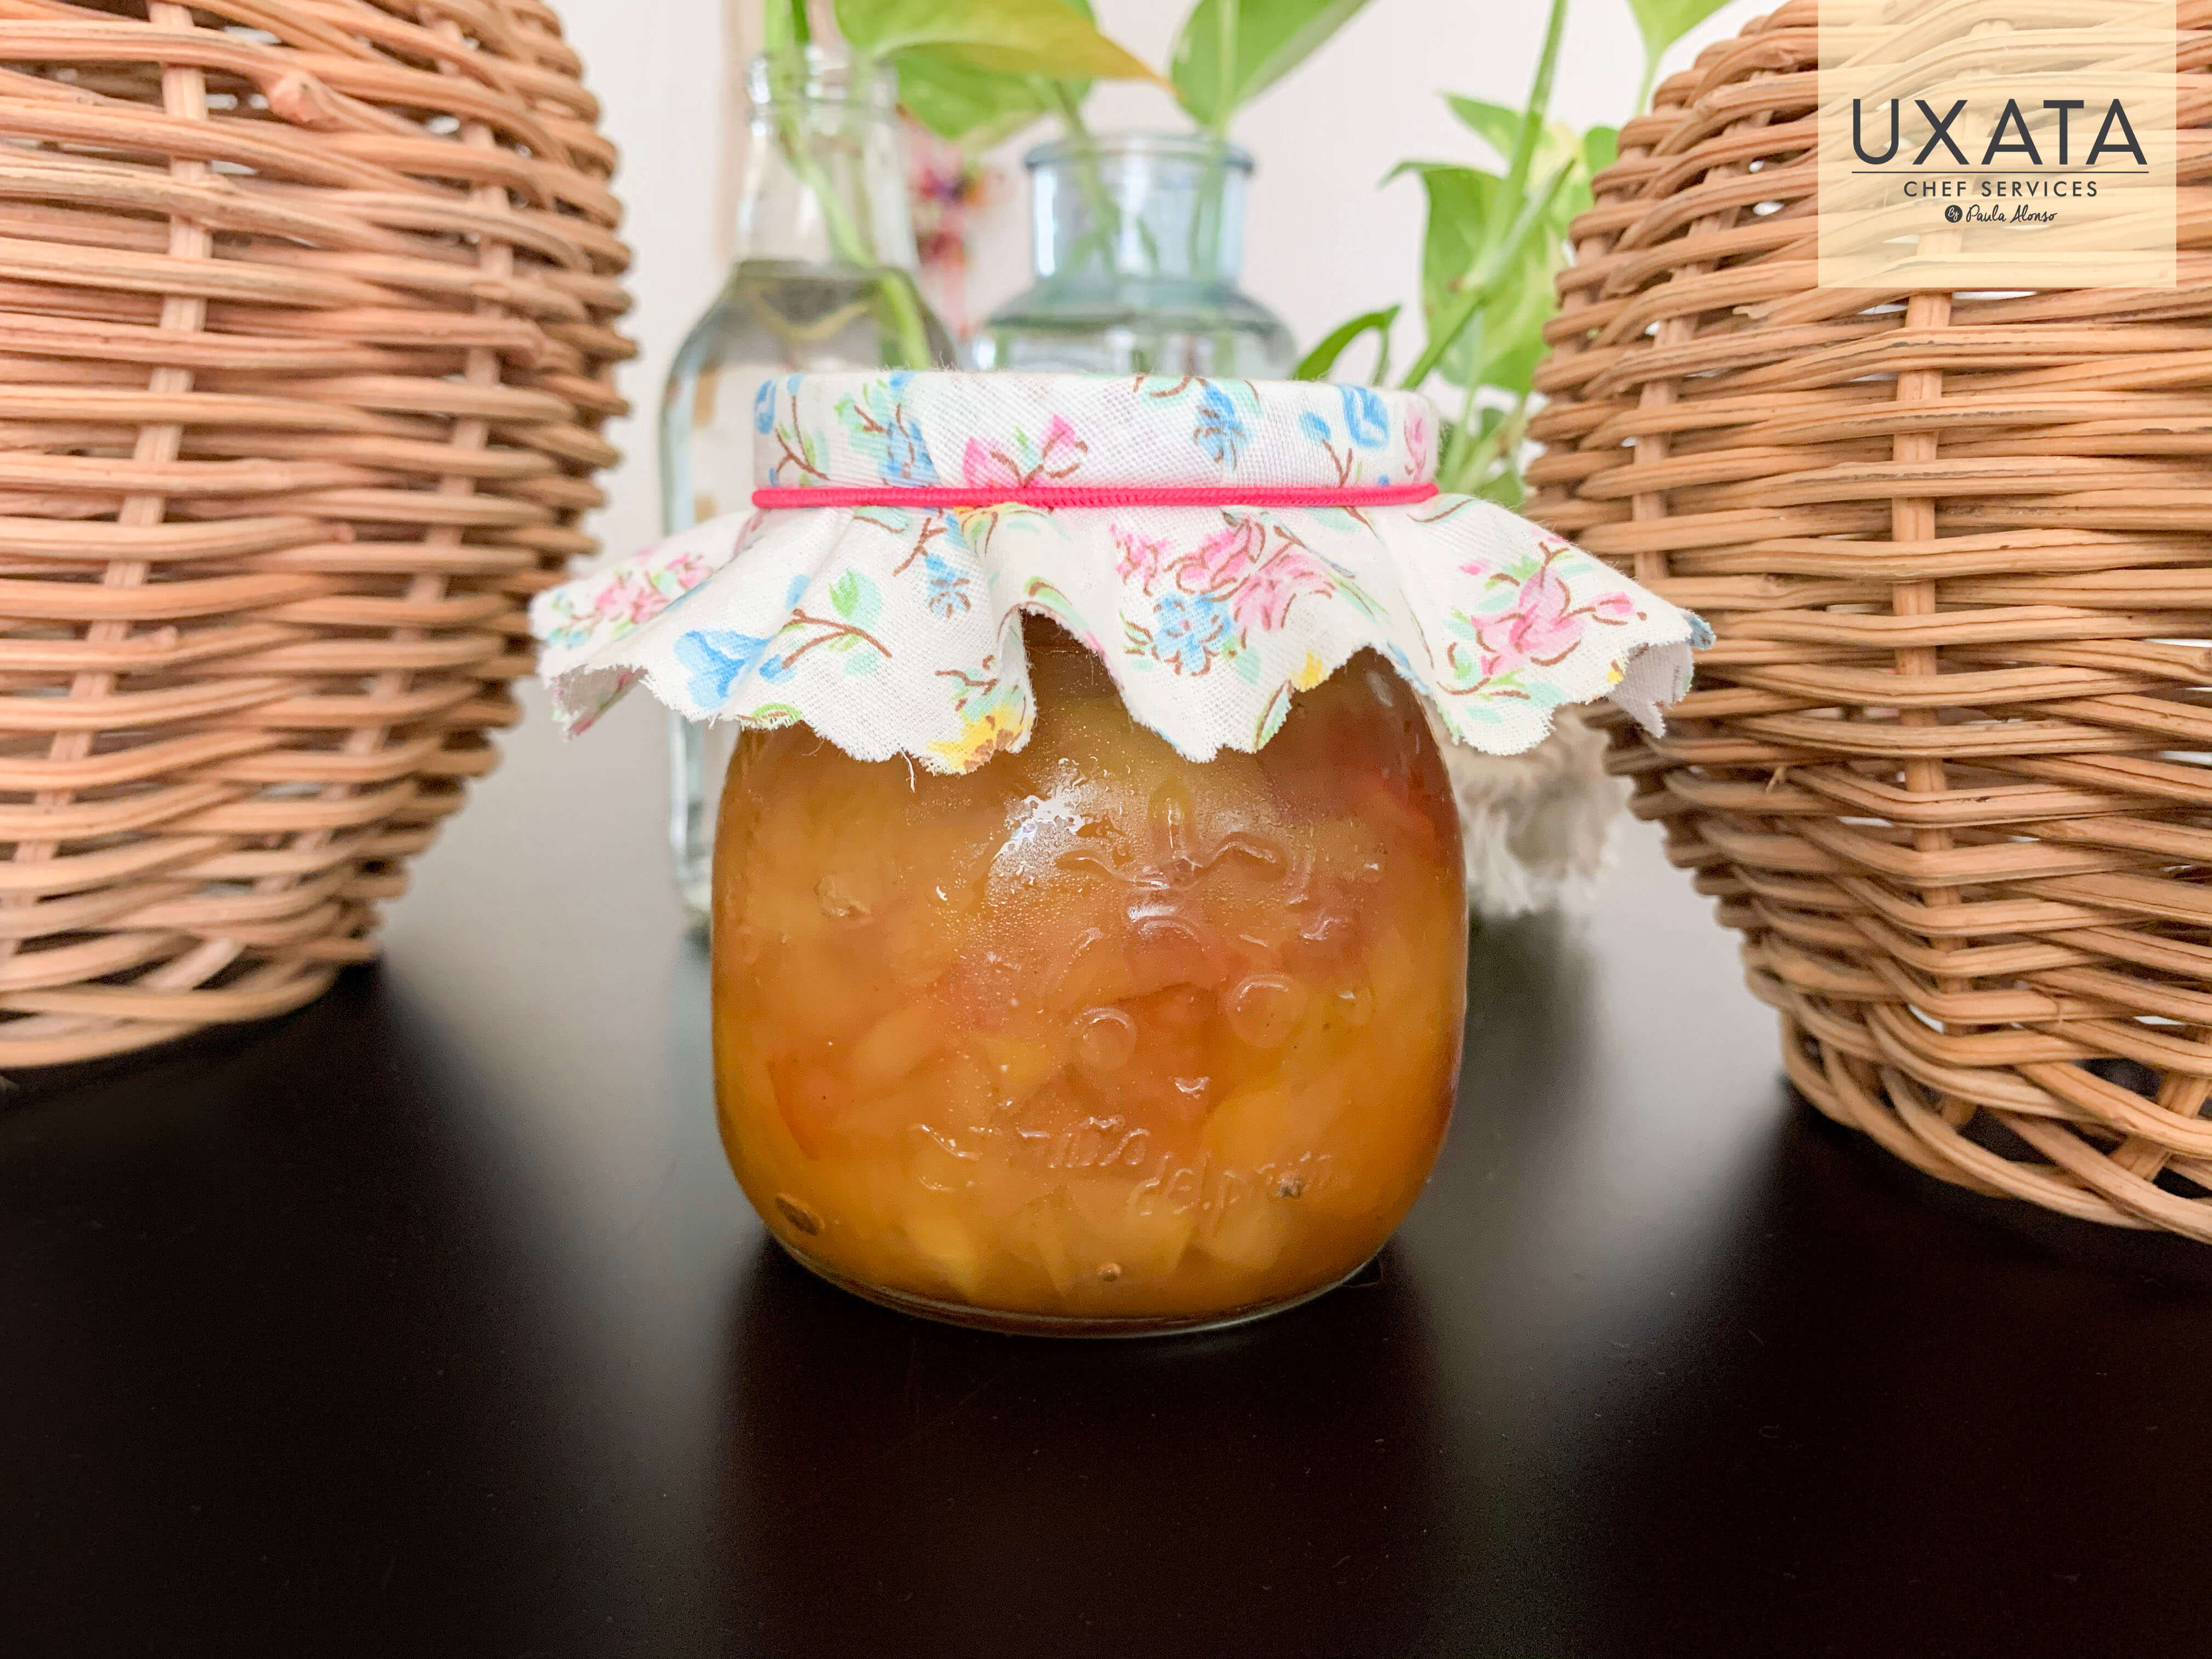 Apple and spices marmalade in a lovely jar by UXATA Chef Services